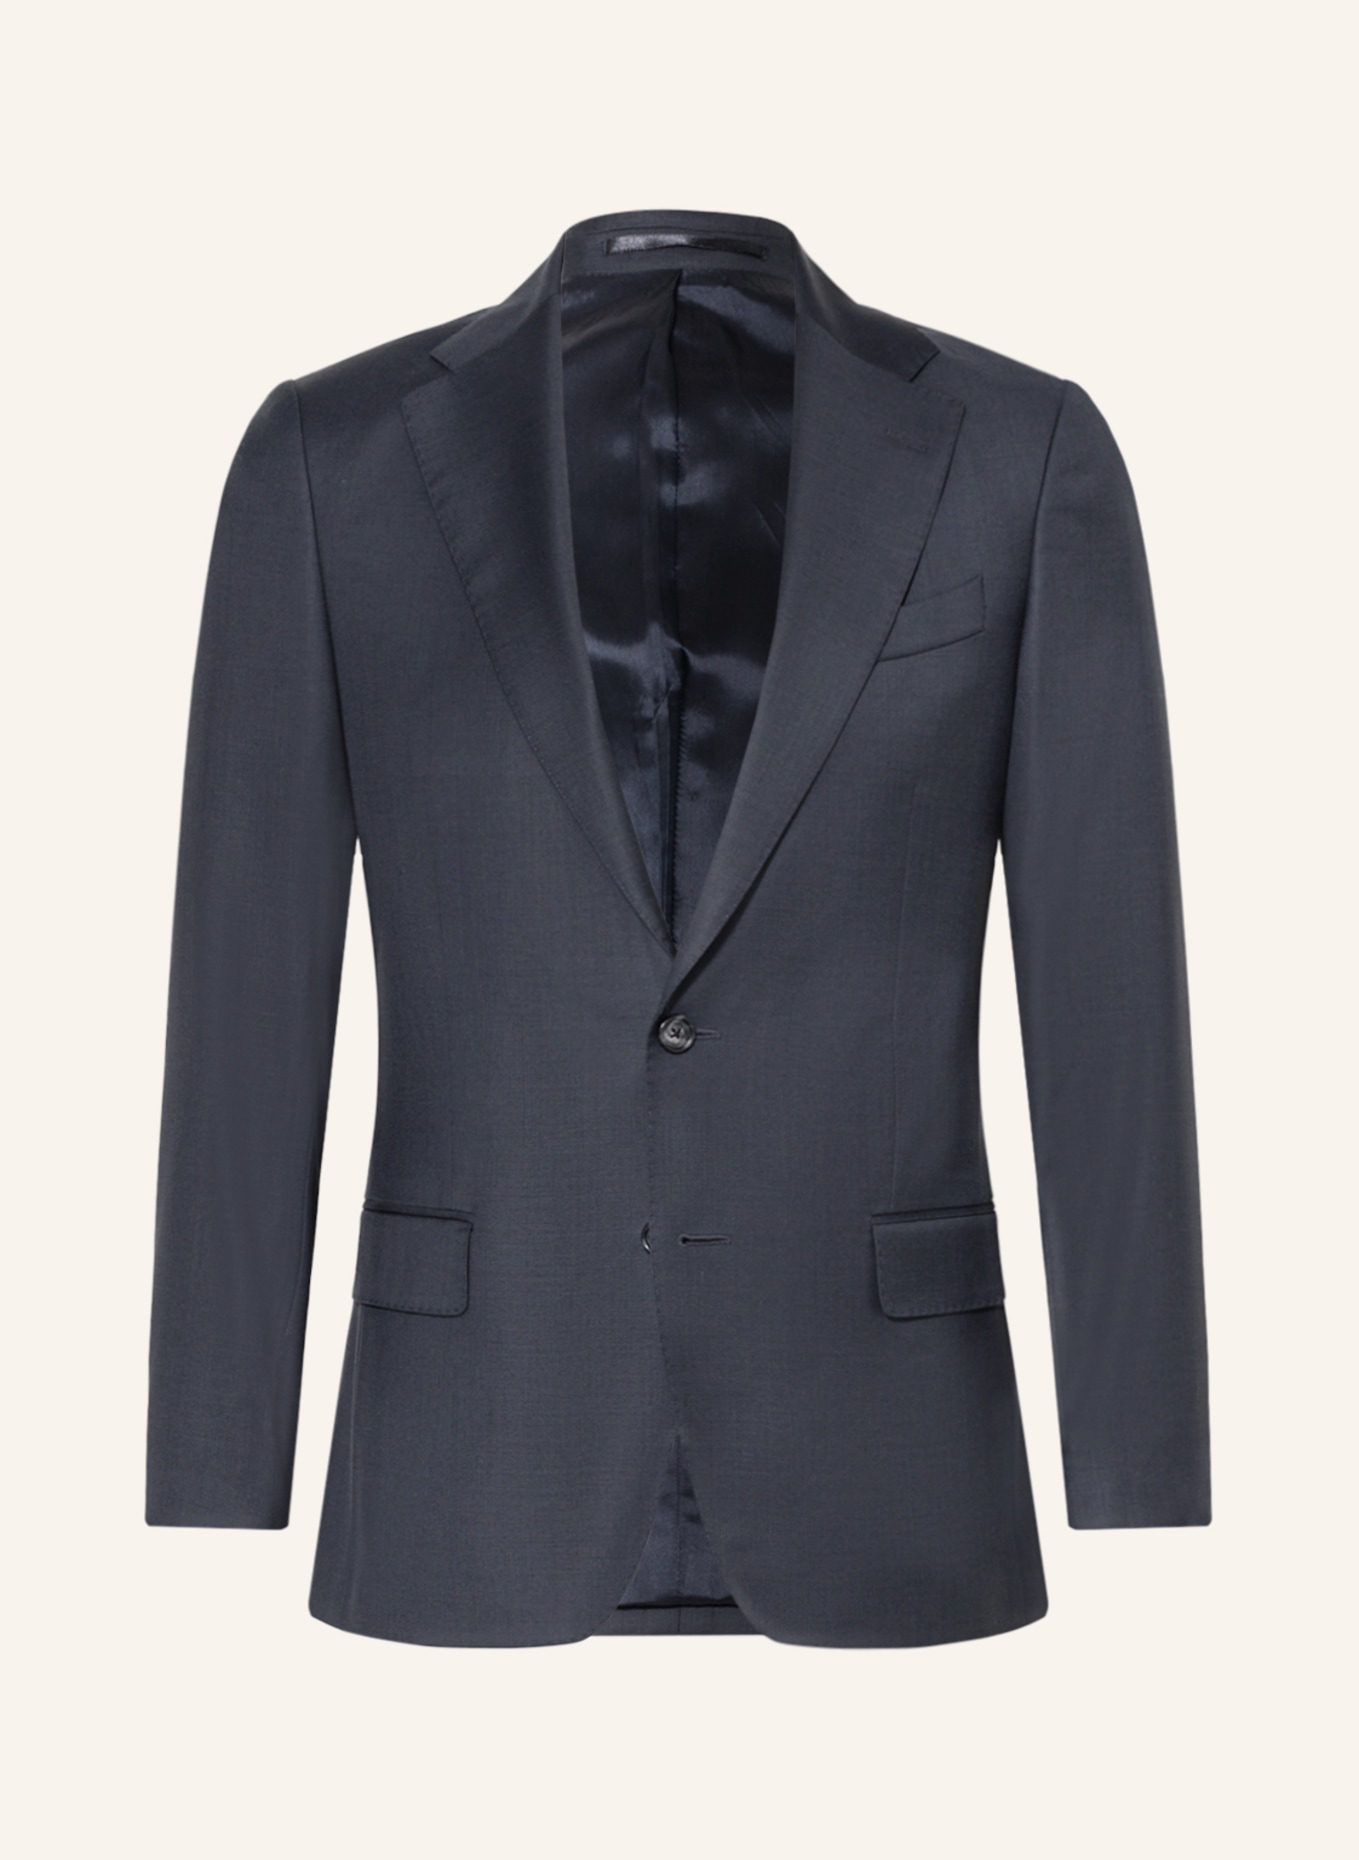 CHAS Suit jacket extra slim fit, Color: 1/176 Navy (Image 1)